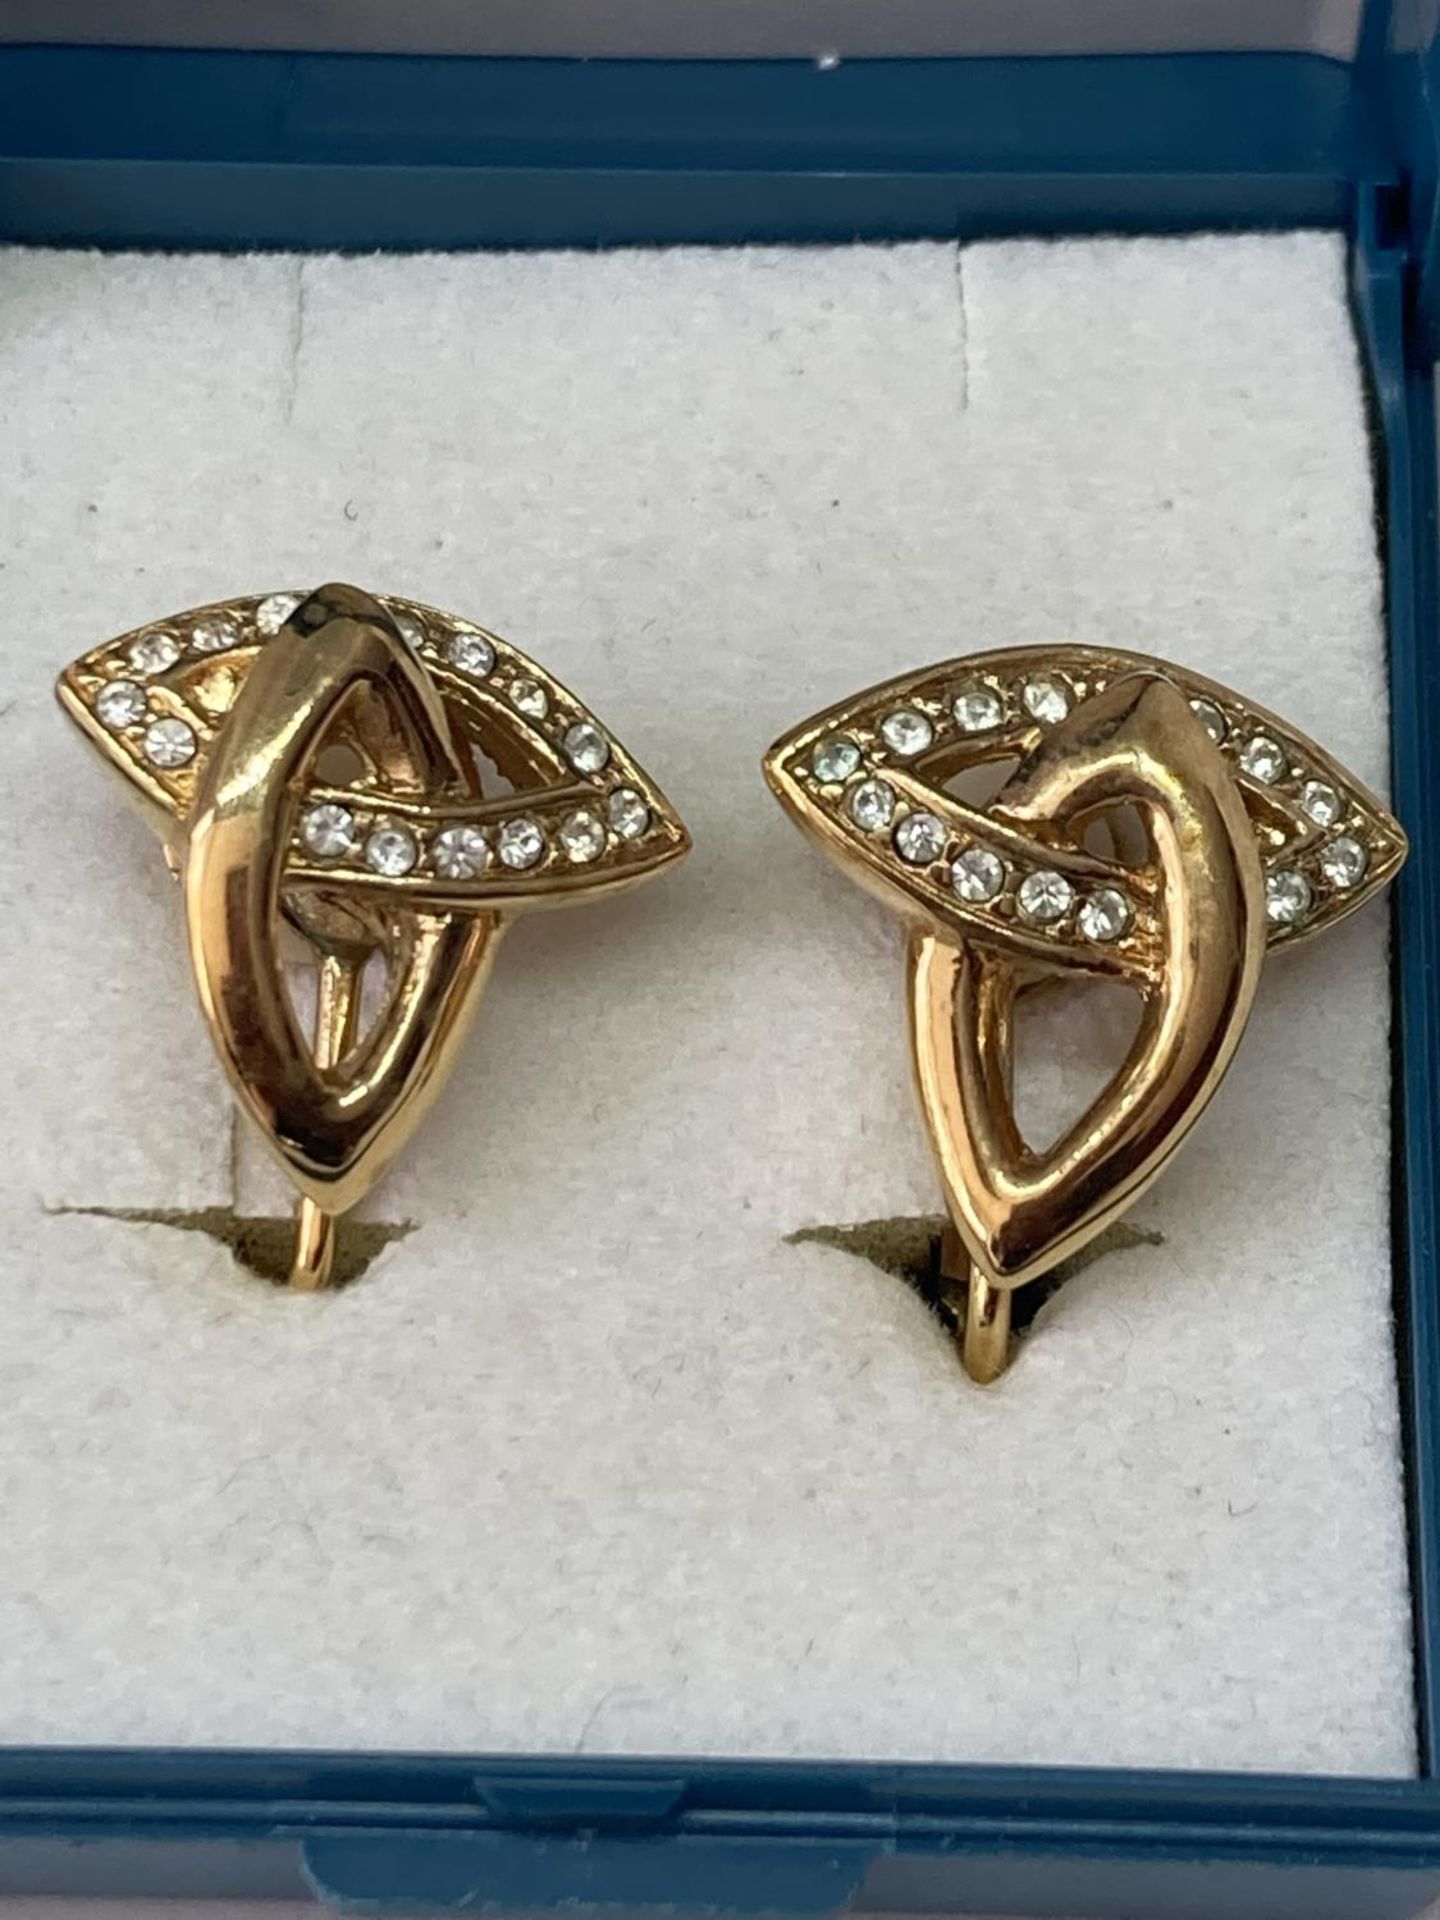 A PAIR OF VINTAGE ATTWOOD GOLD PLATED EARRINGS IN A PRESENTATION BOX - Image 4 of 8